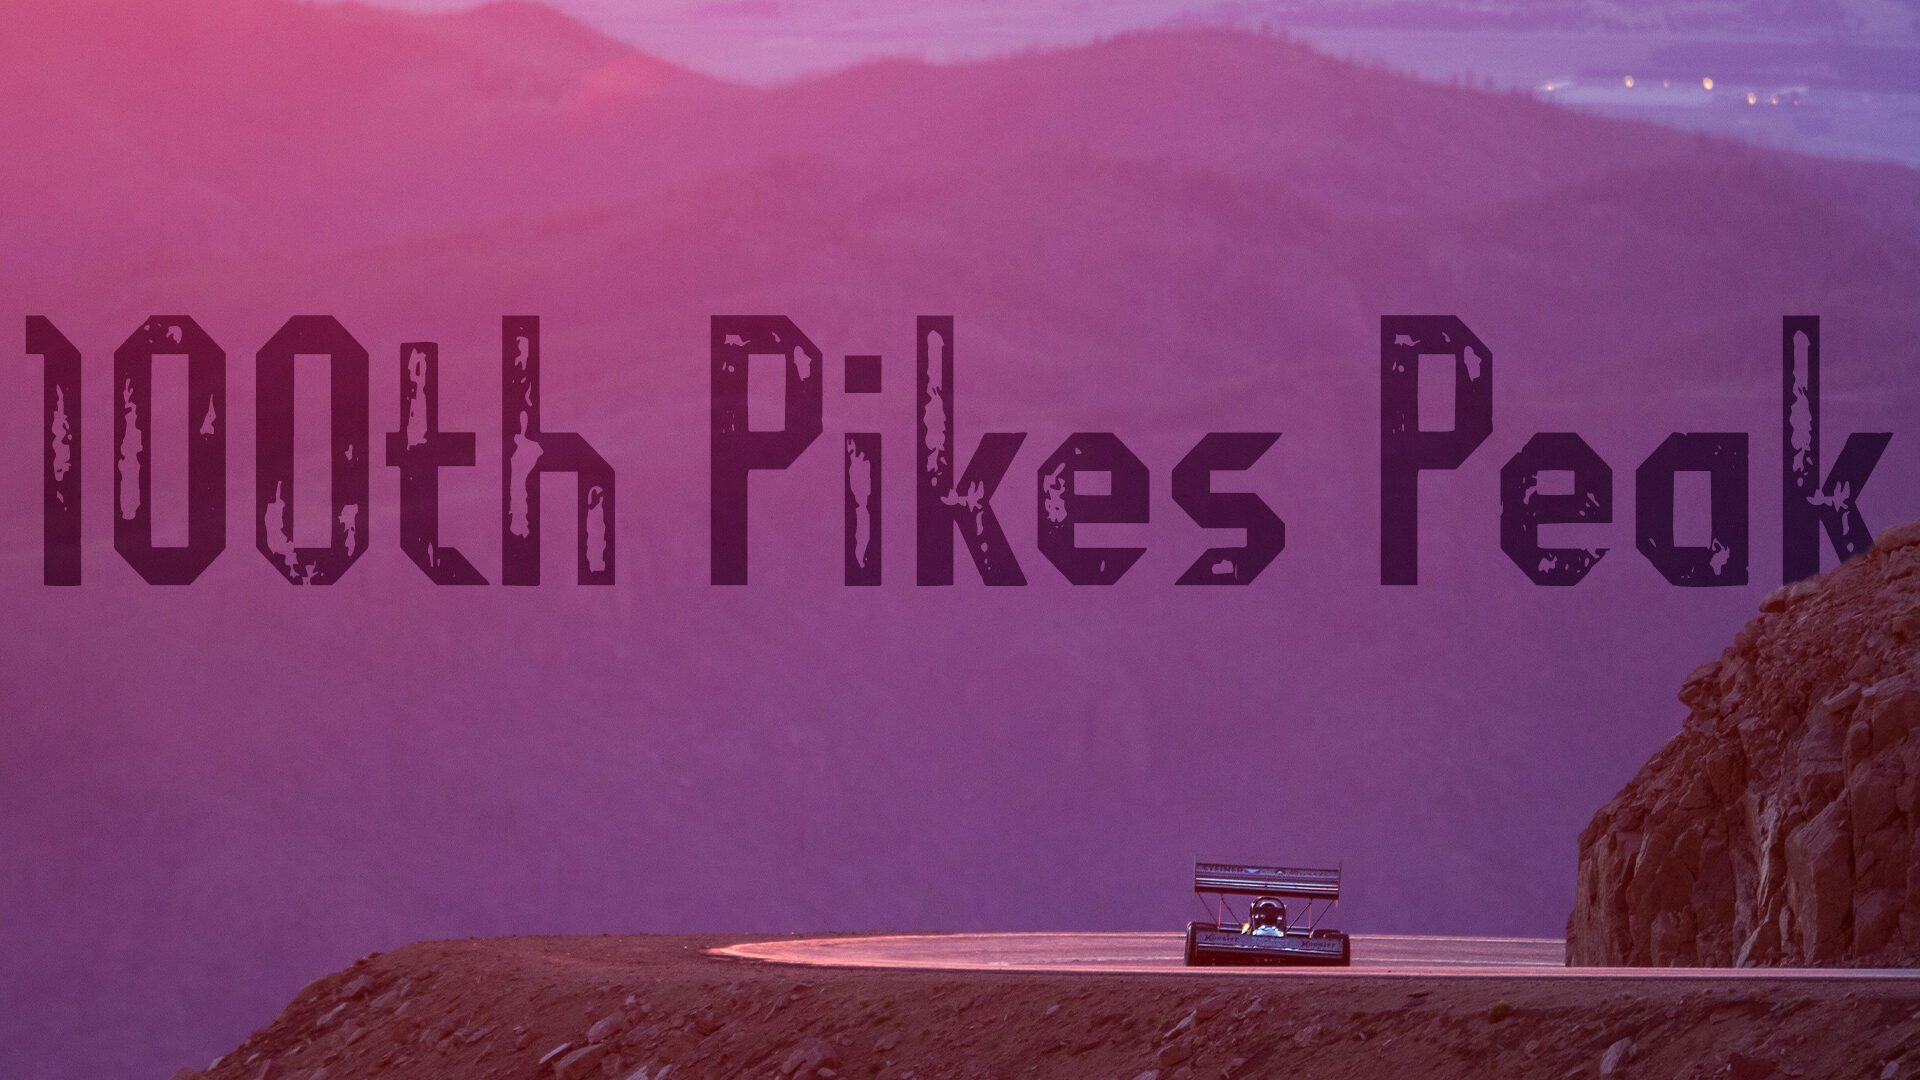 100th running of pikes peak sunrise on the hill